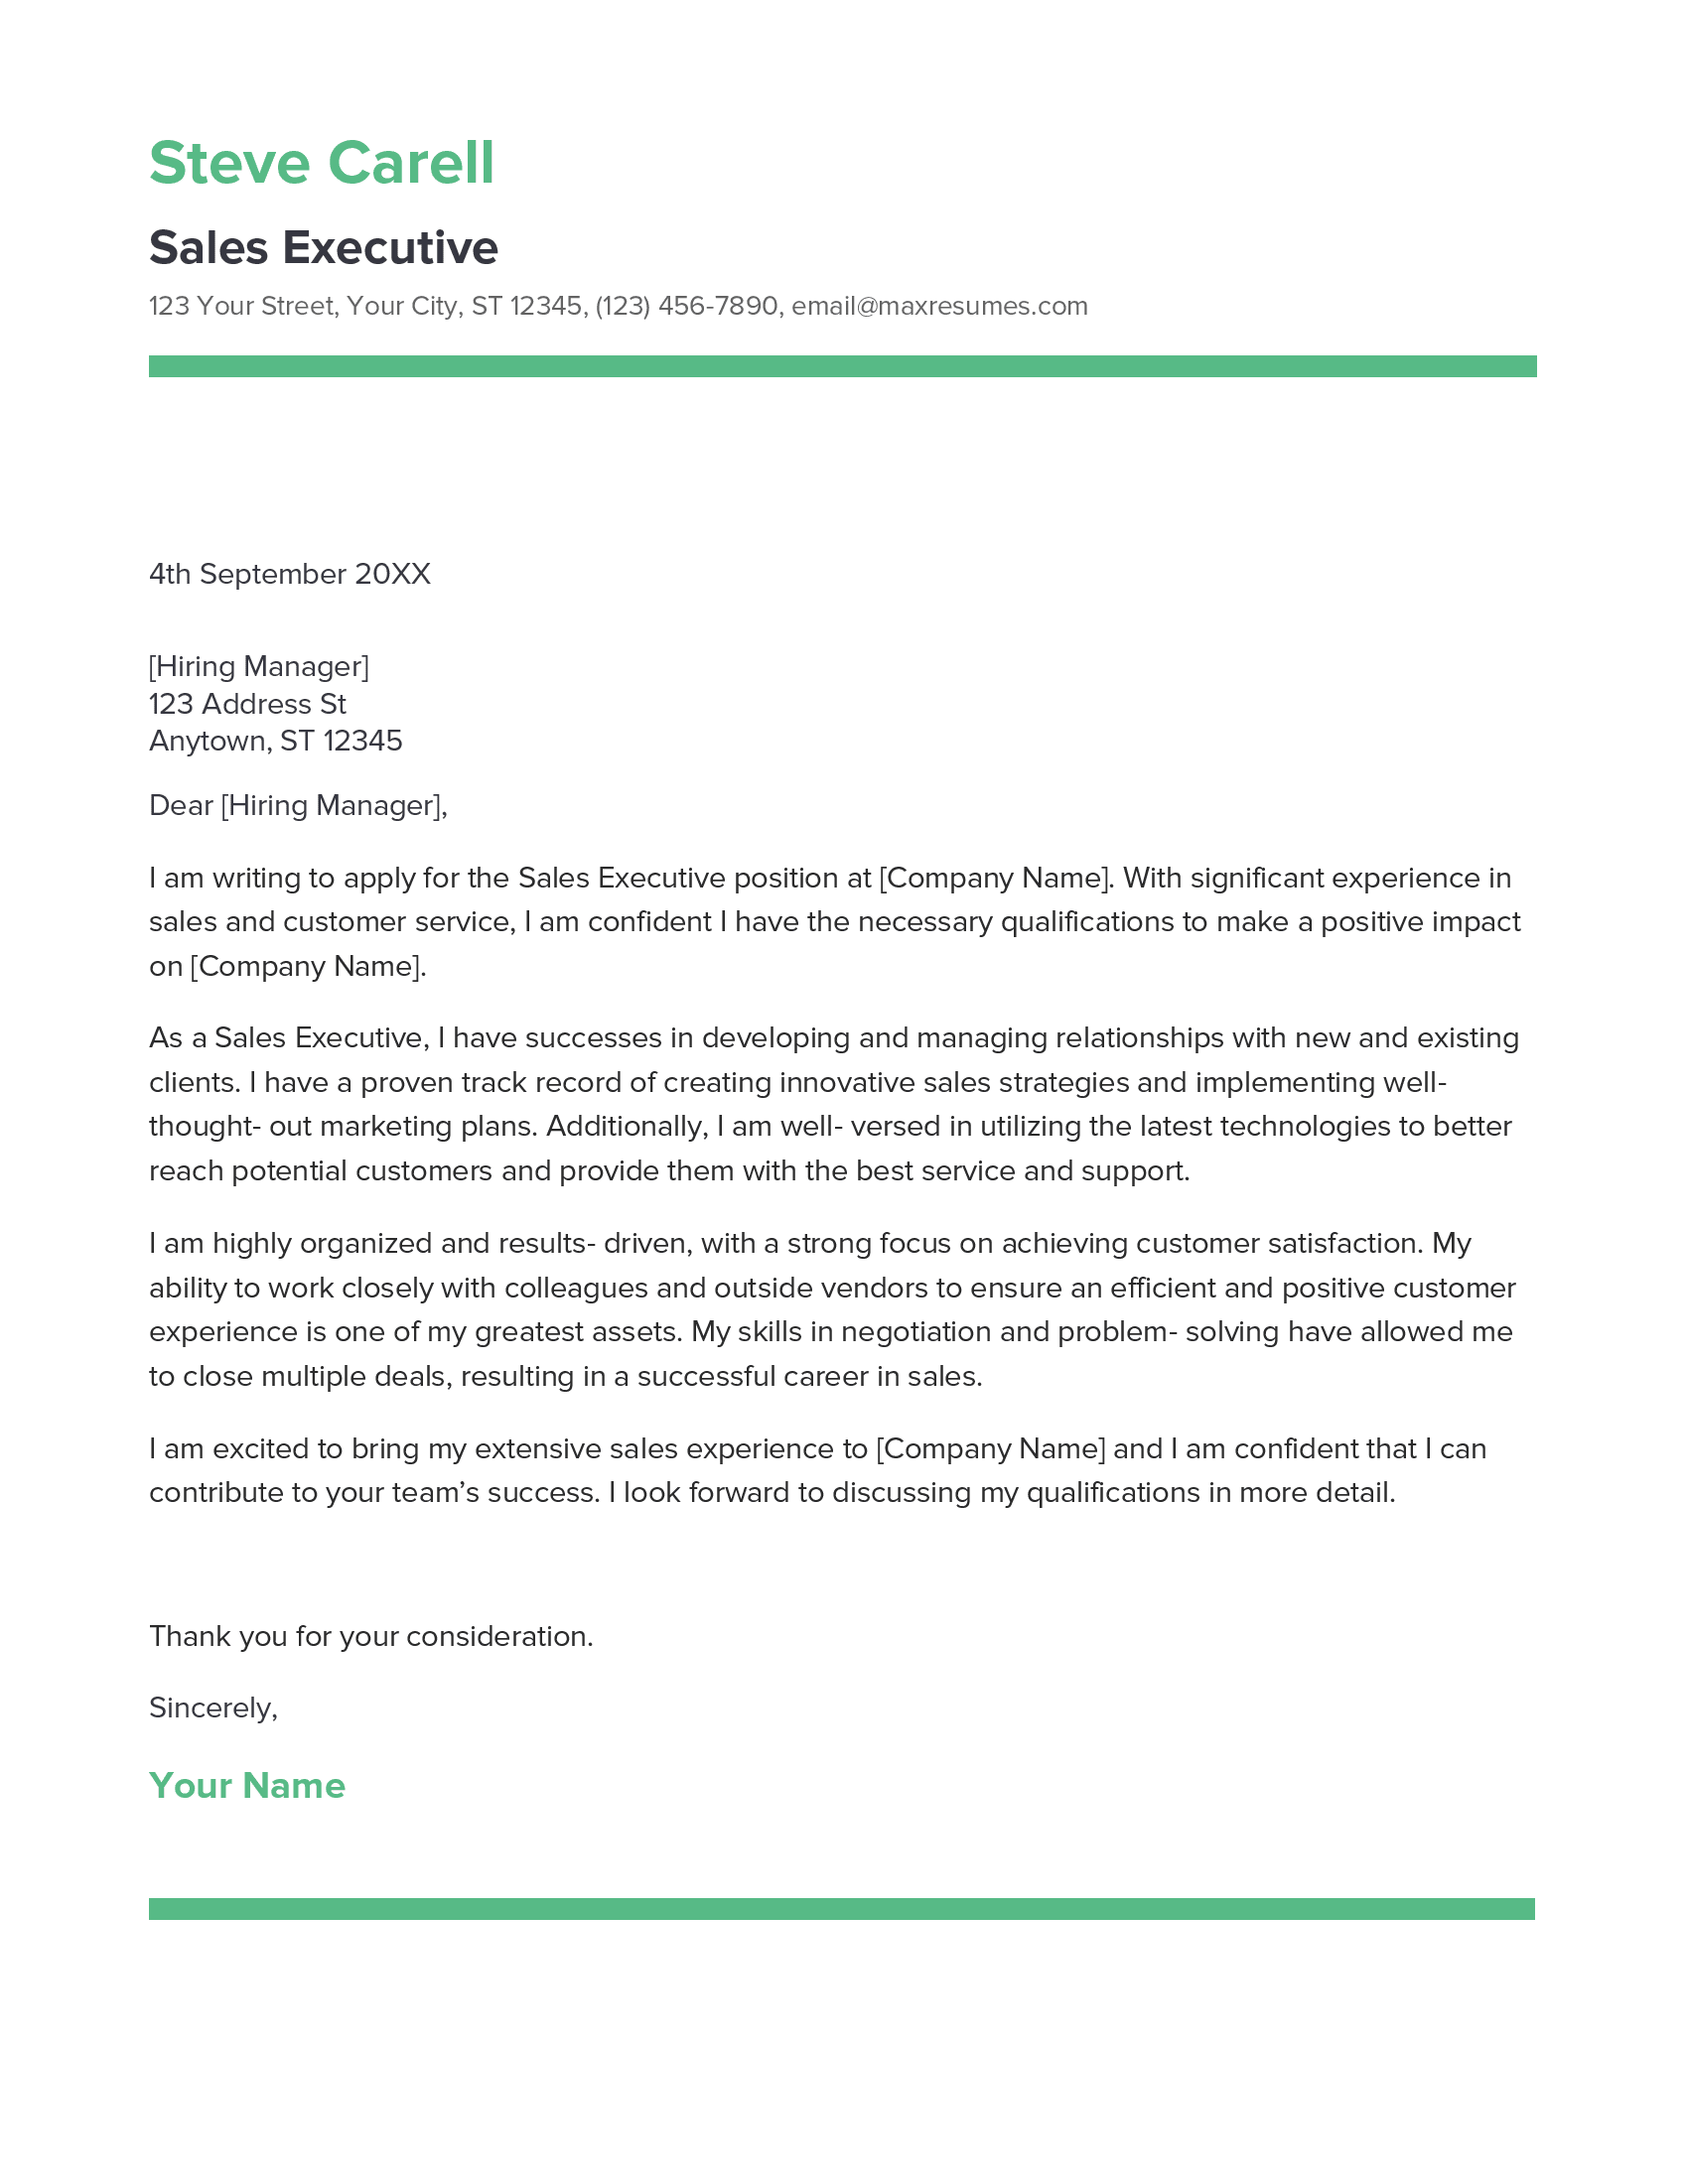 Sales Executive Cover Letter Example